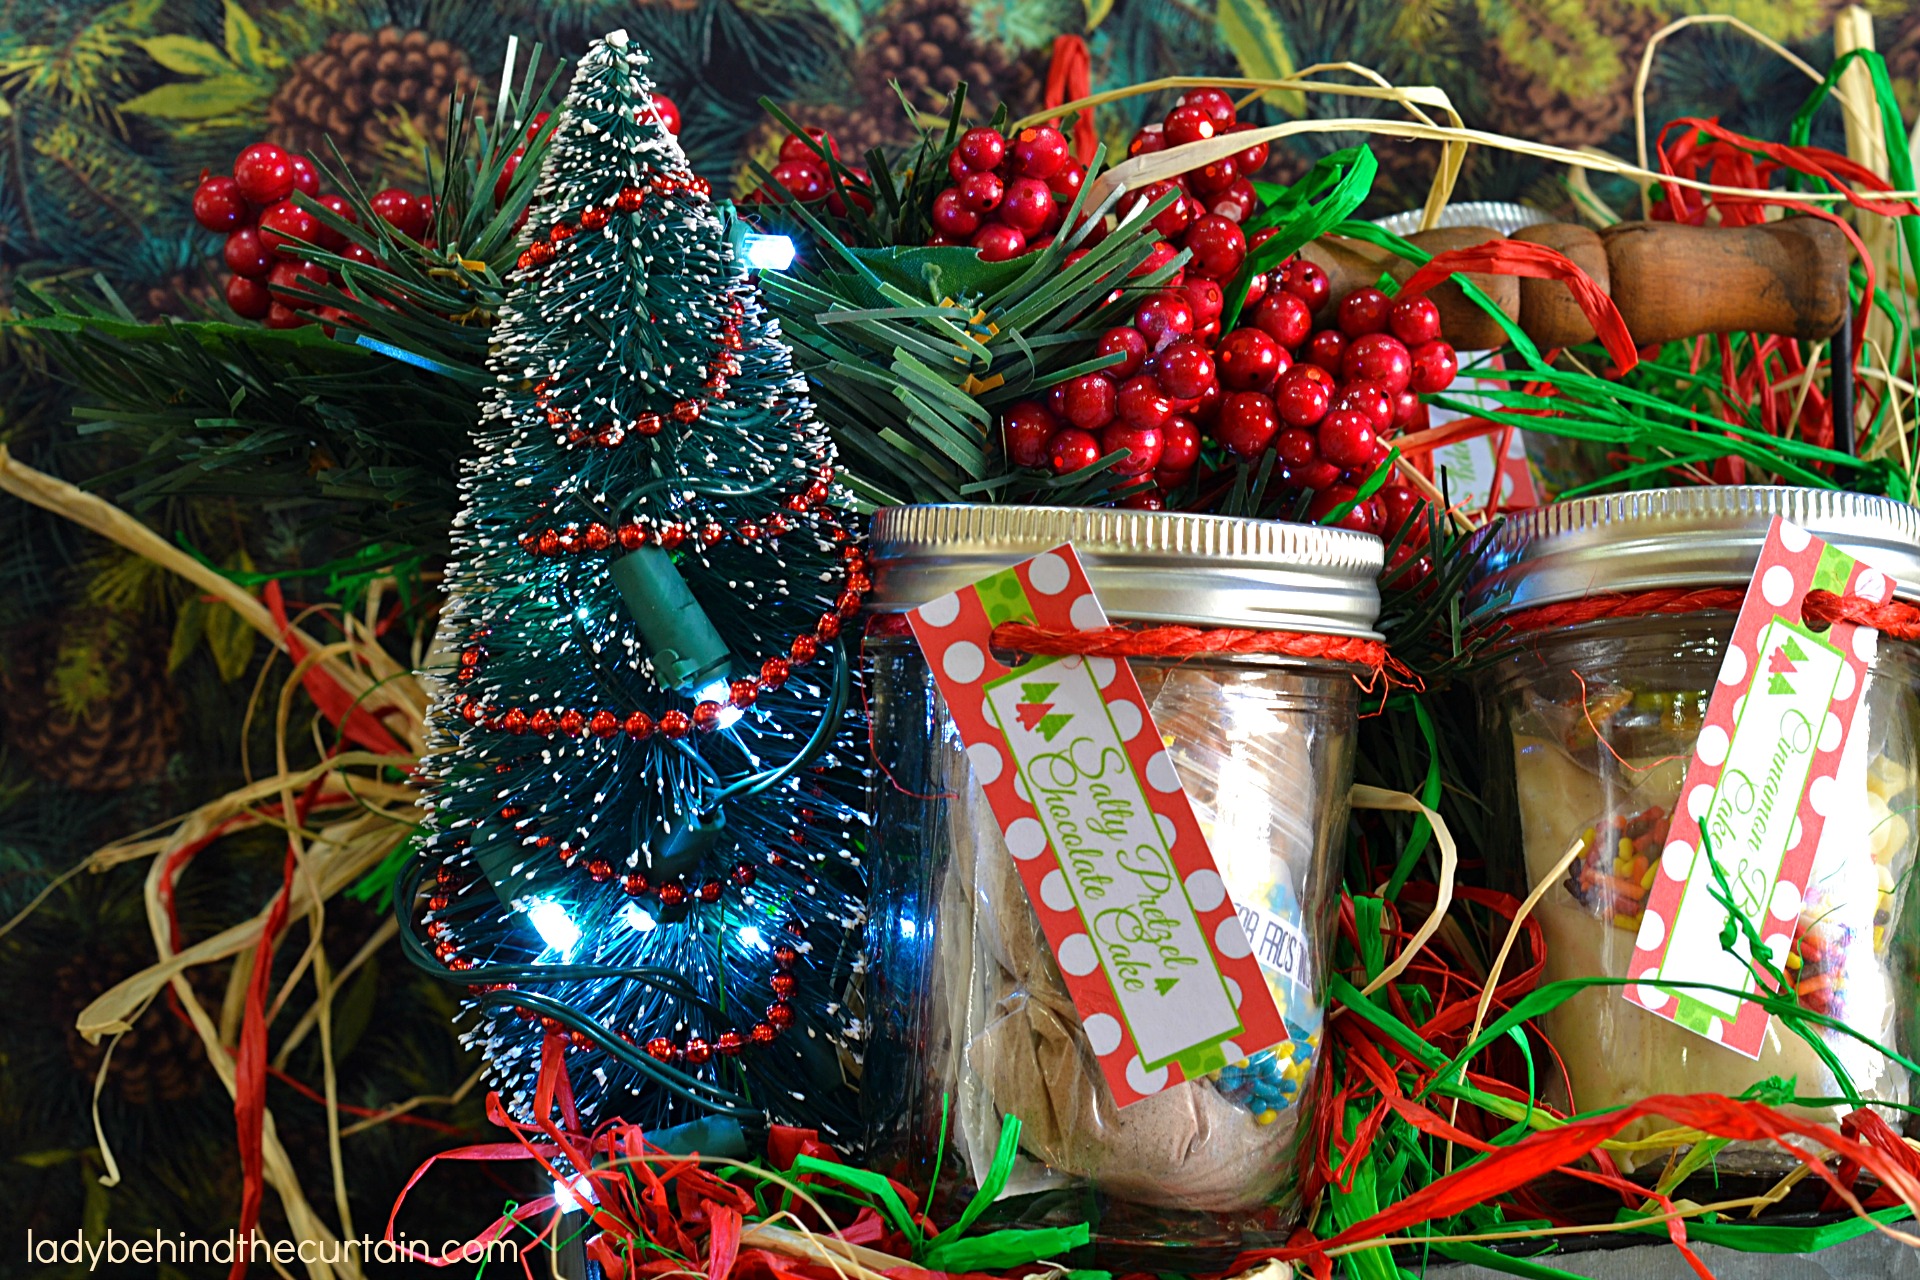 Just Add Water Cake in a Jar | Give the gift of cake! Give a single cake as a Secret Santa gift or the whole six pack for a Thanksgiving hostess gift. These also make a great Office party Christmas gift.